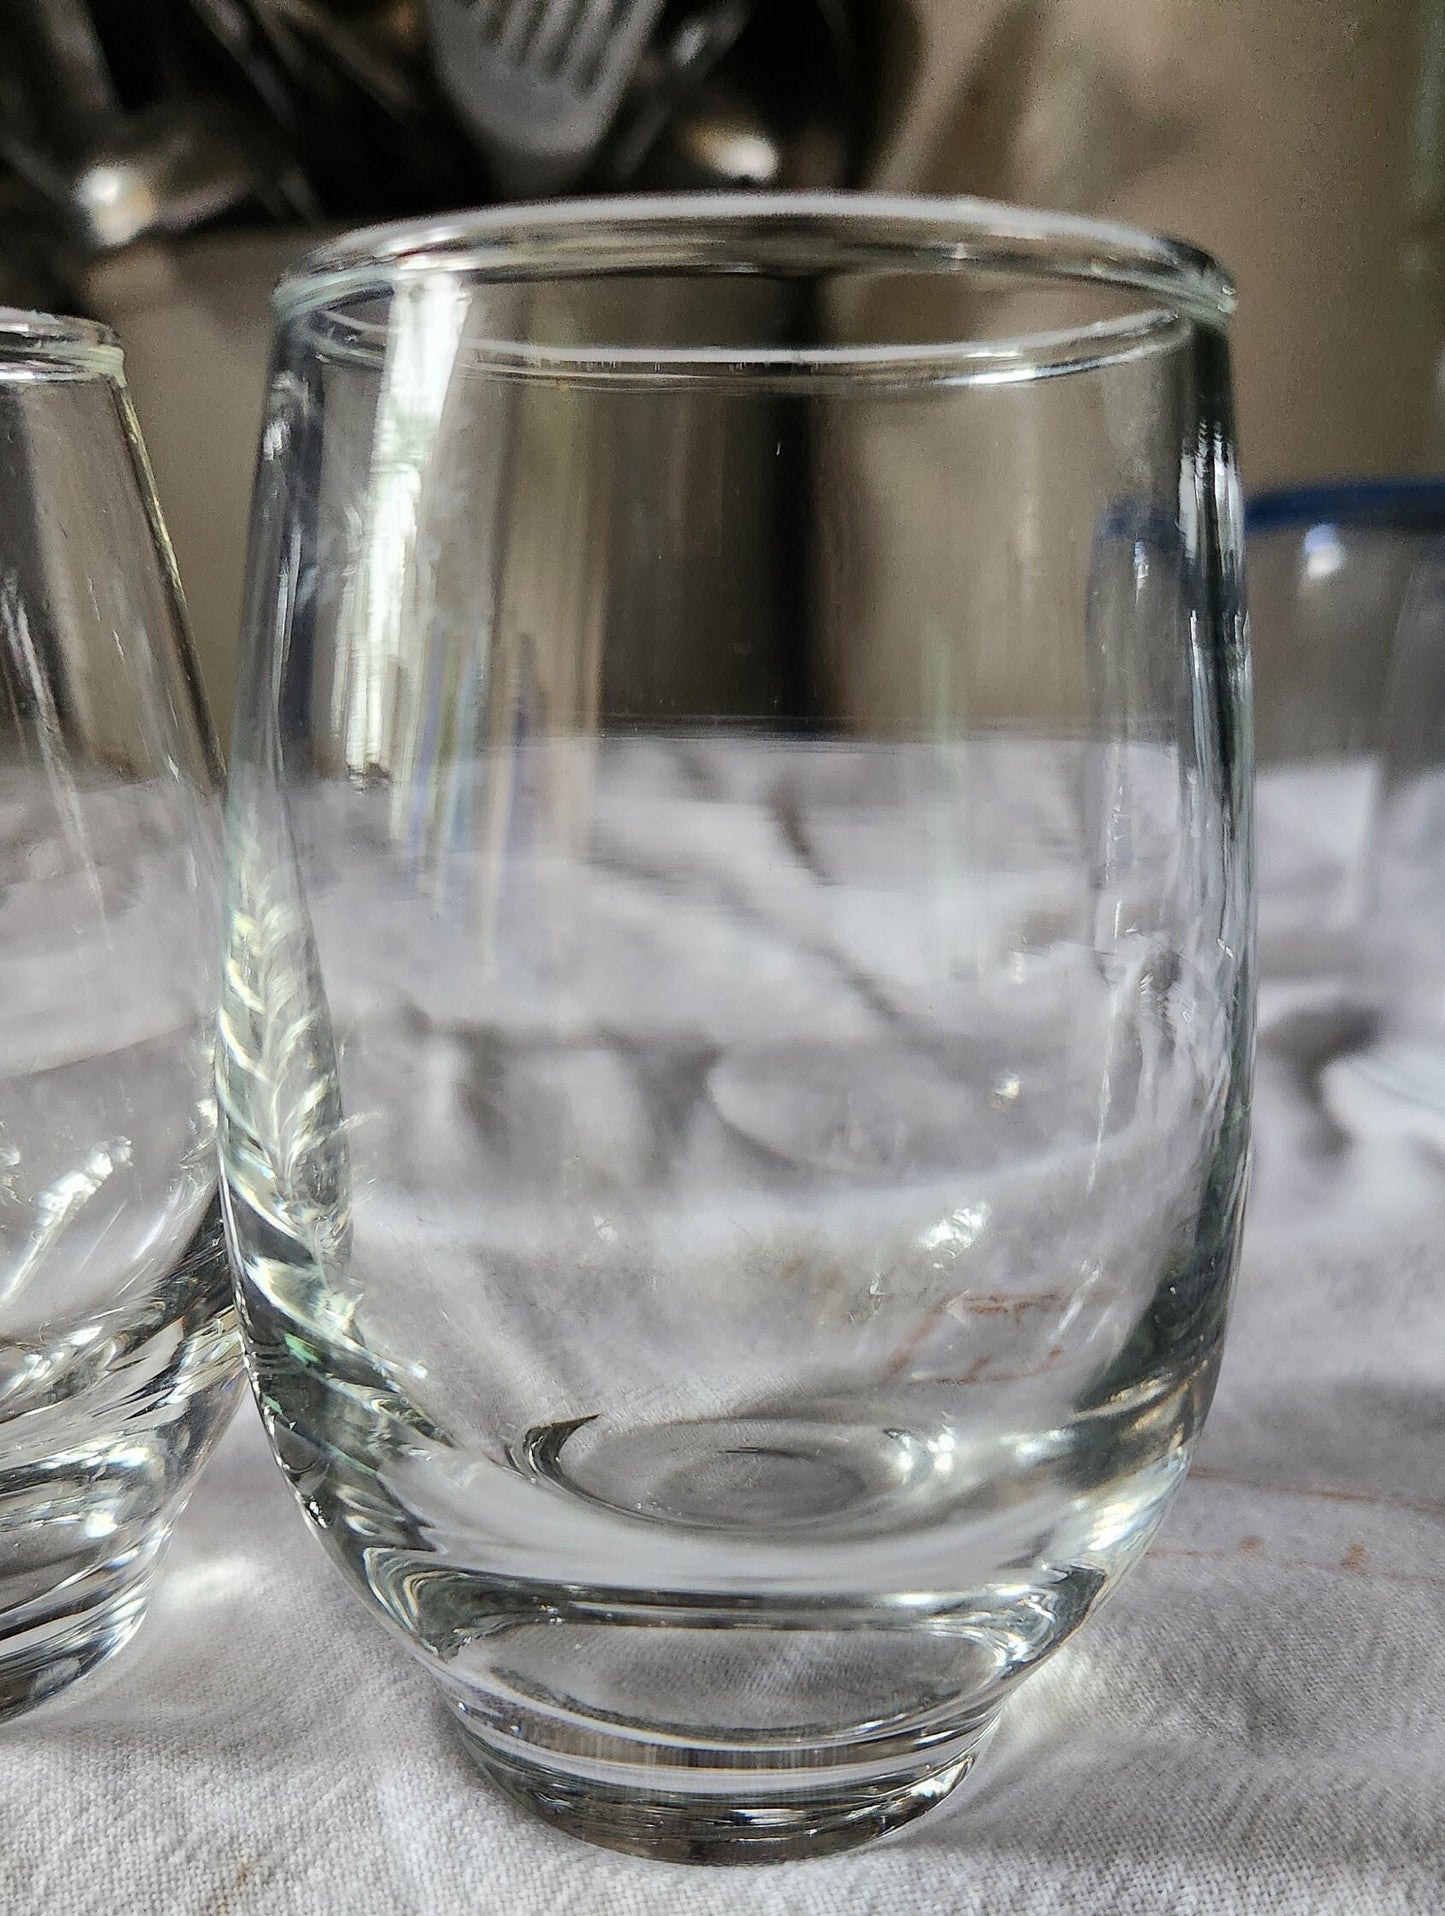 Vintage Roly Poly Tempo Glassware by Libbey - Set of 3